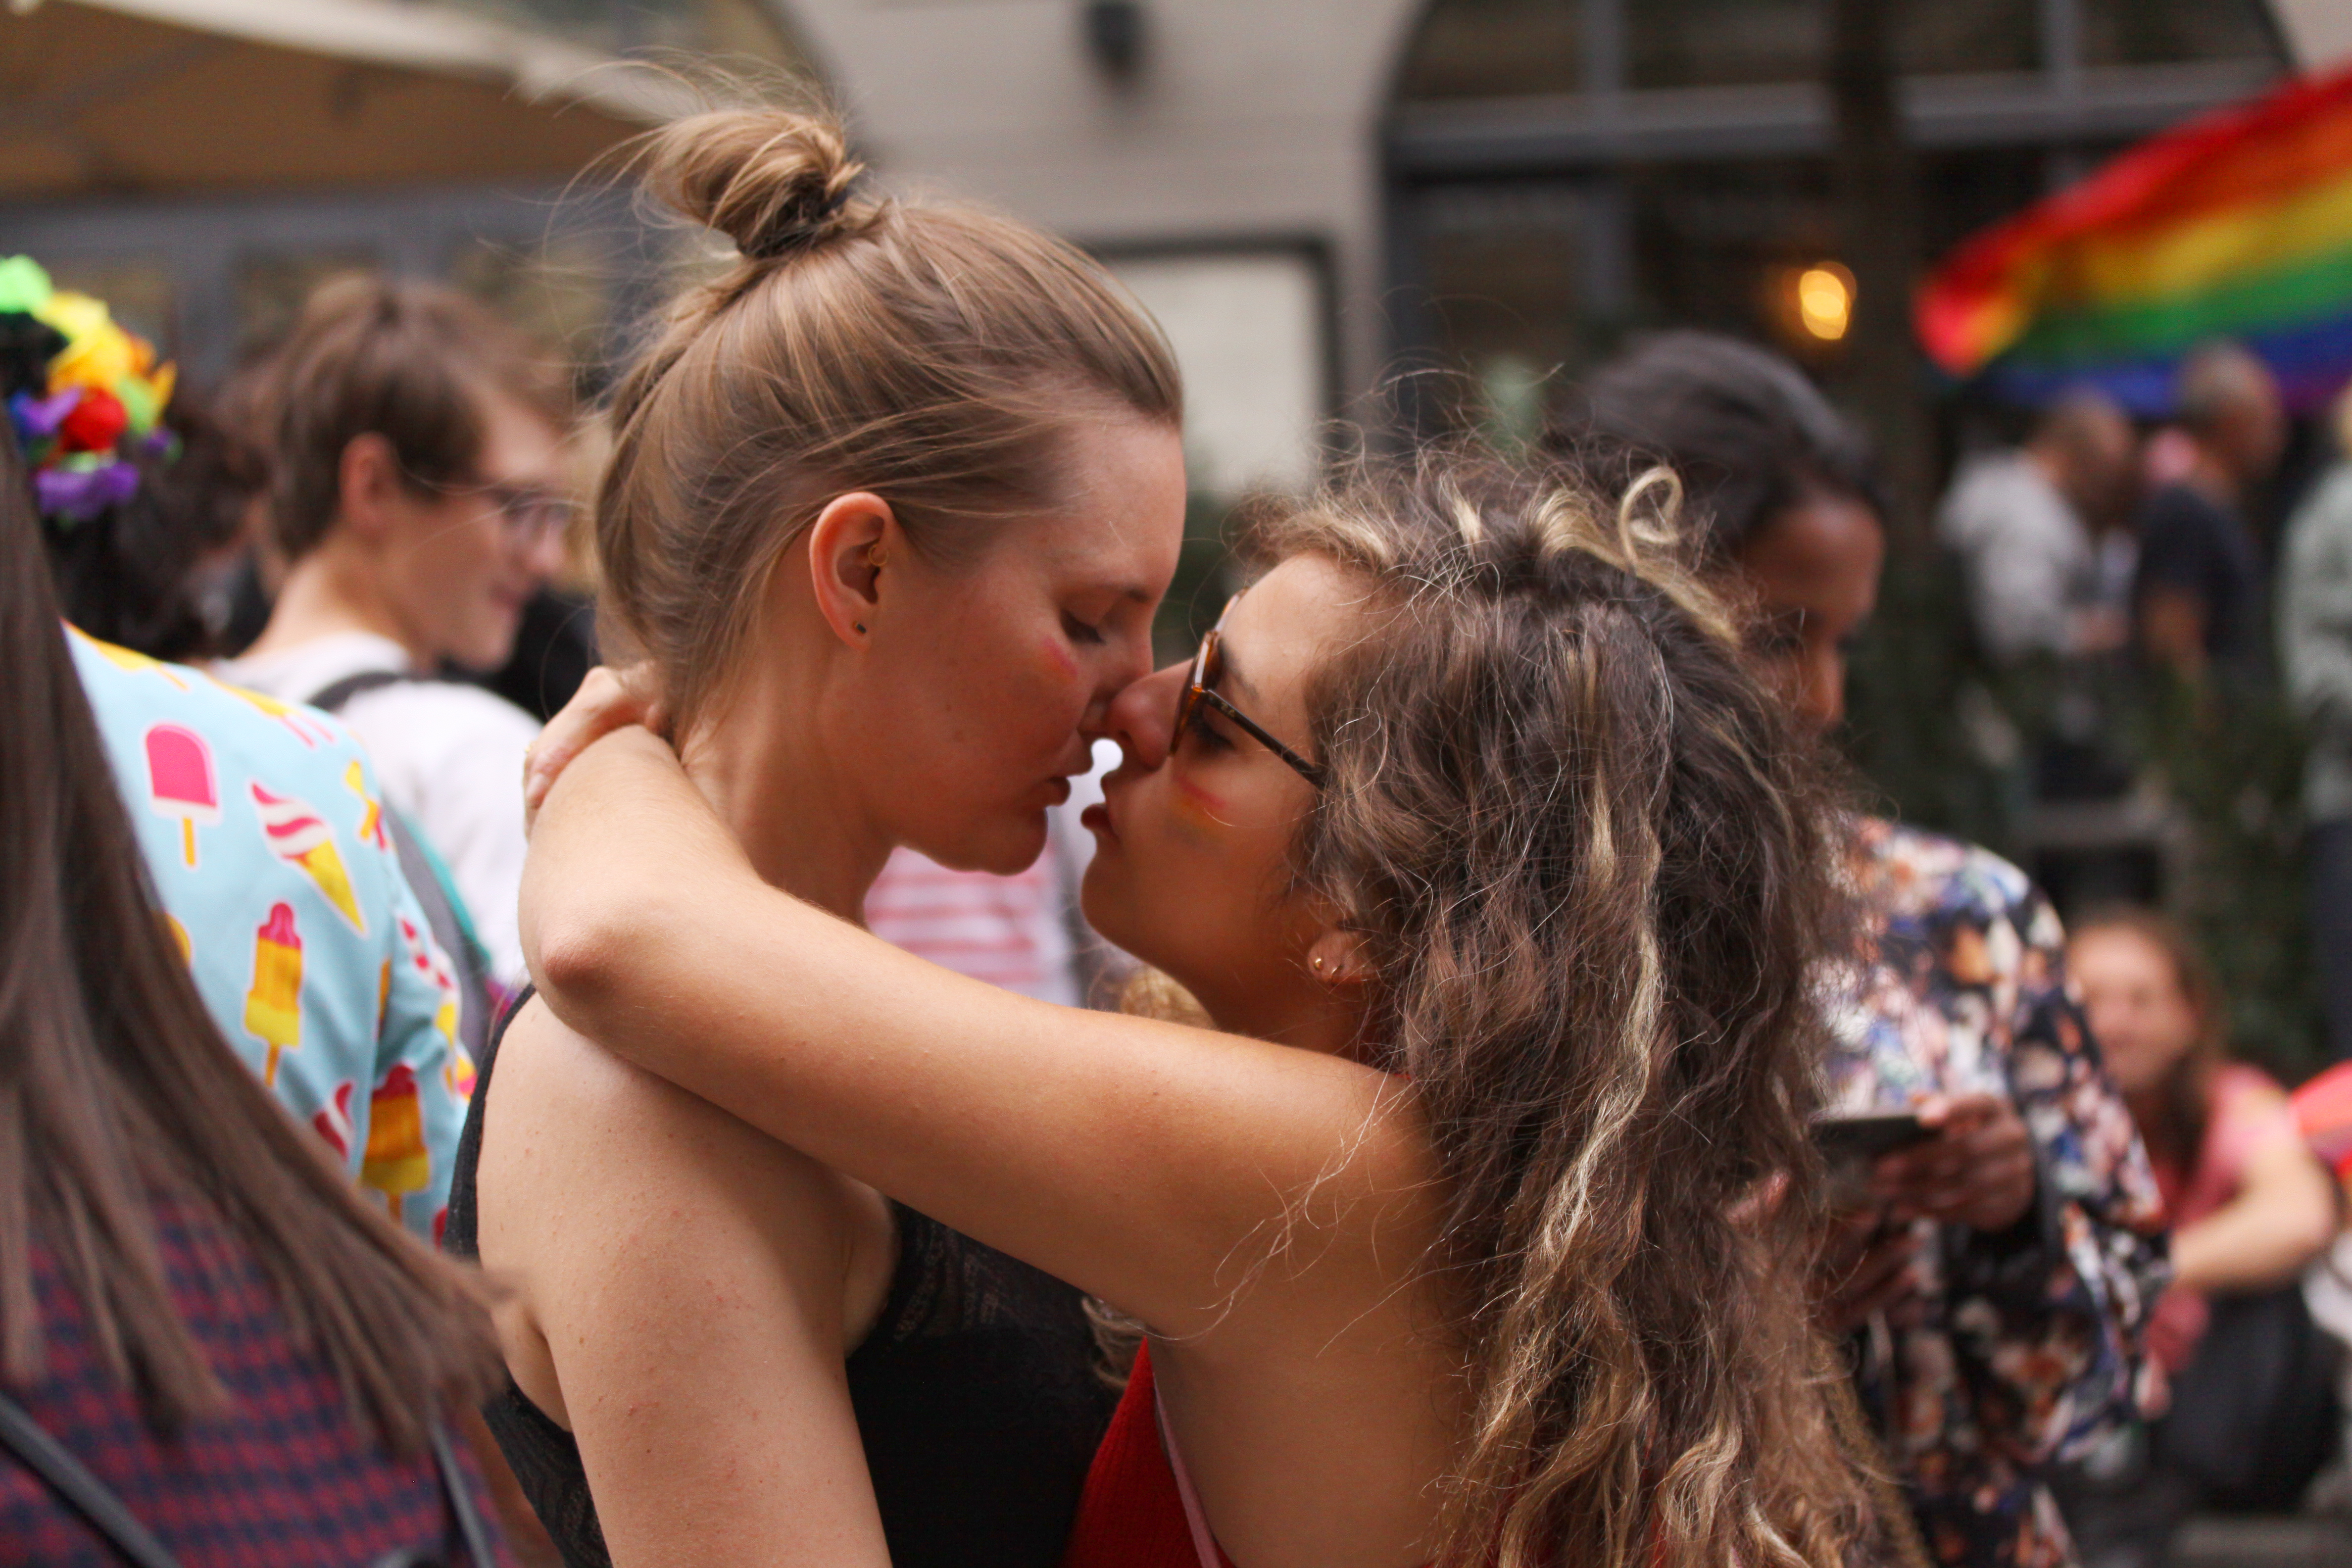 Free dating sites for lgbt couples